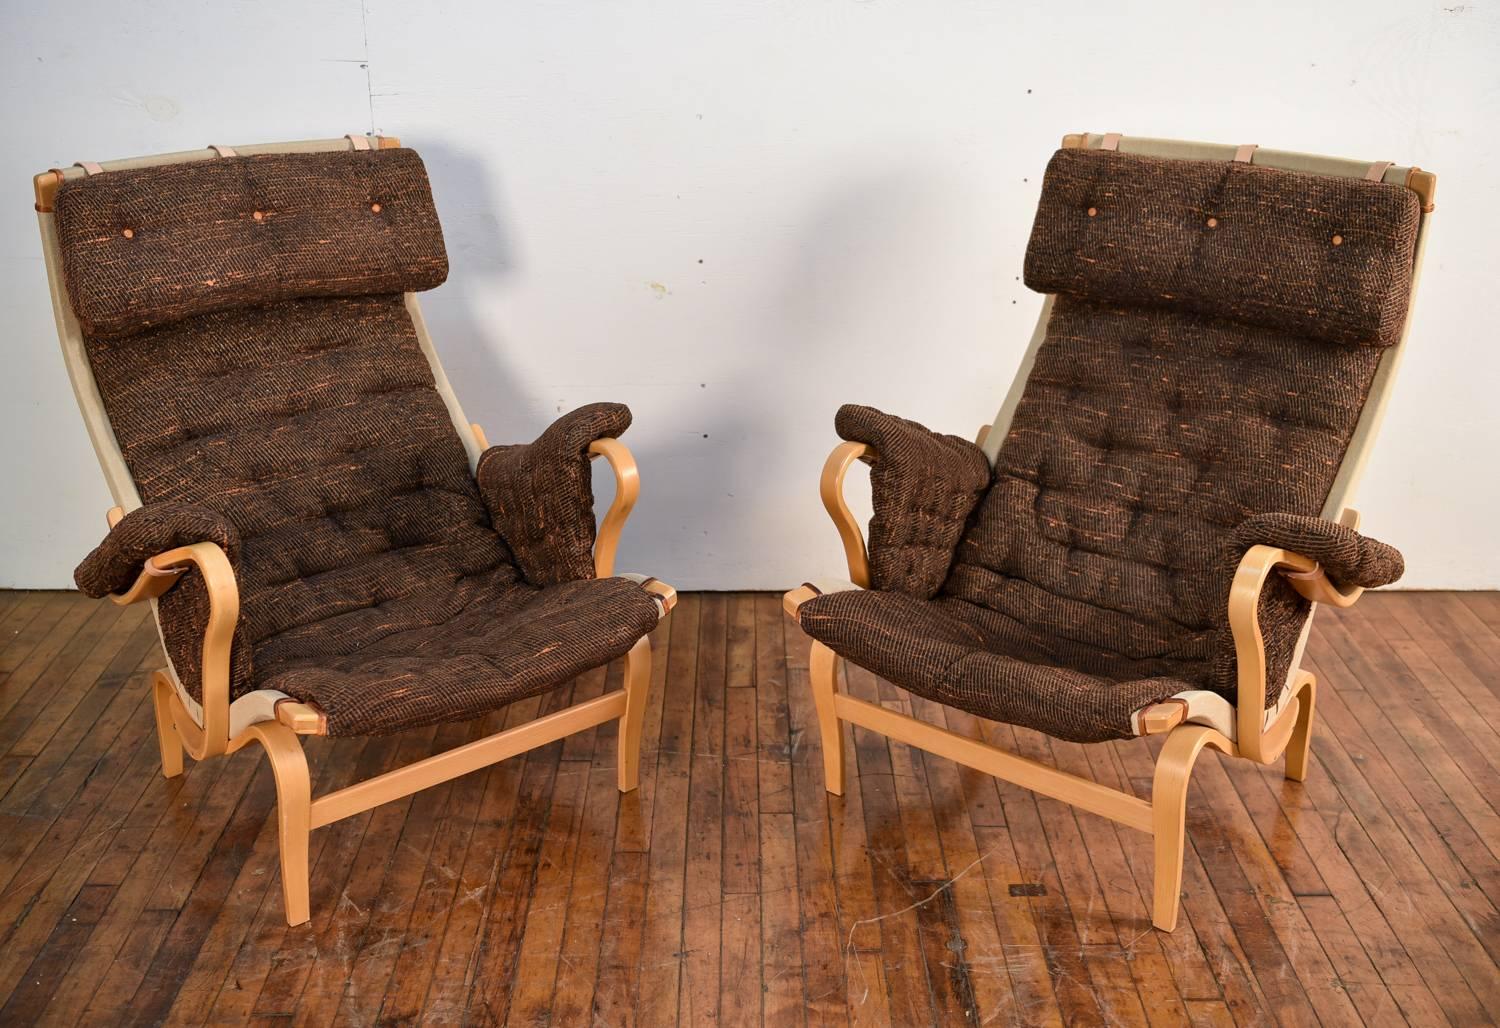 A pair of 'Pernilla' lounge chairs designed by Bruno Mathsson and produced by DUX in 1969. These chairs are notable for their wavy bentwood frames, which provide for a unique, visually interesting form. Upon these frames sit cushions that extend